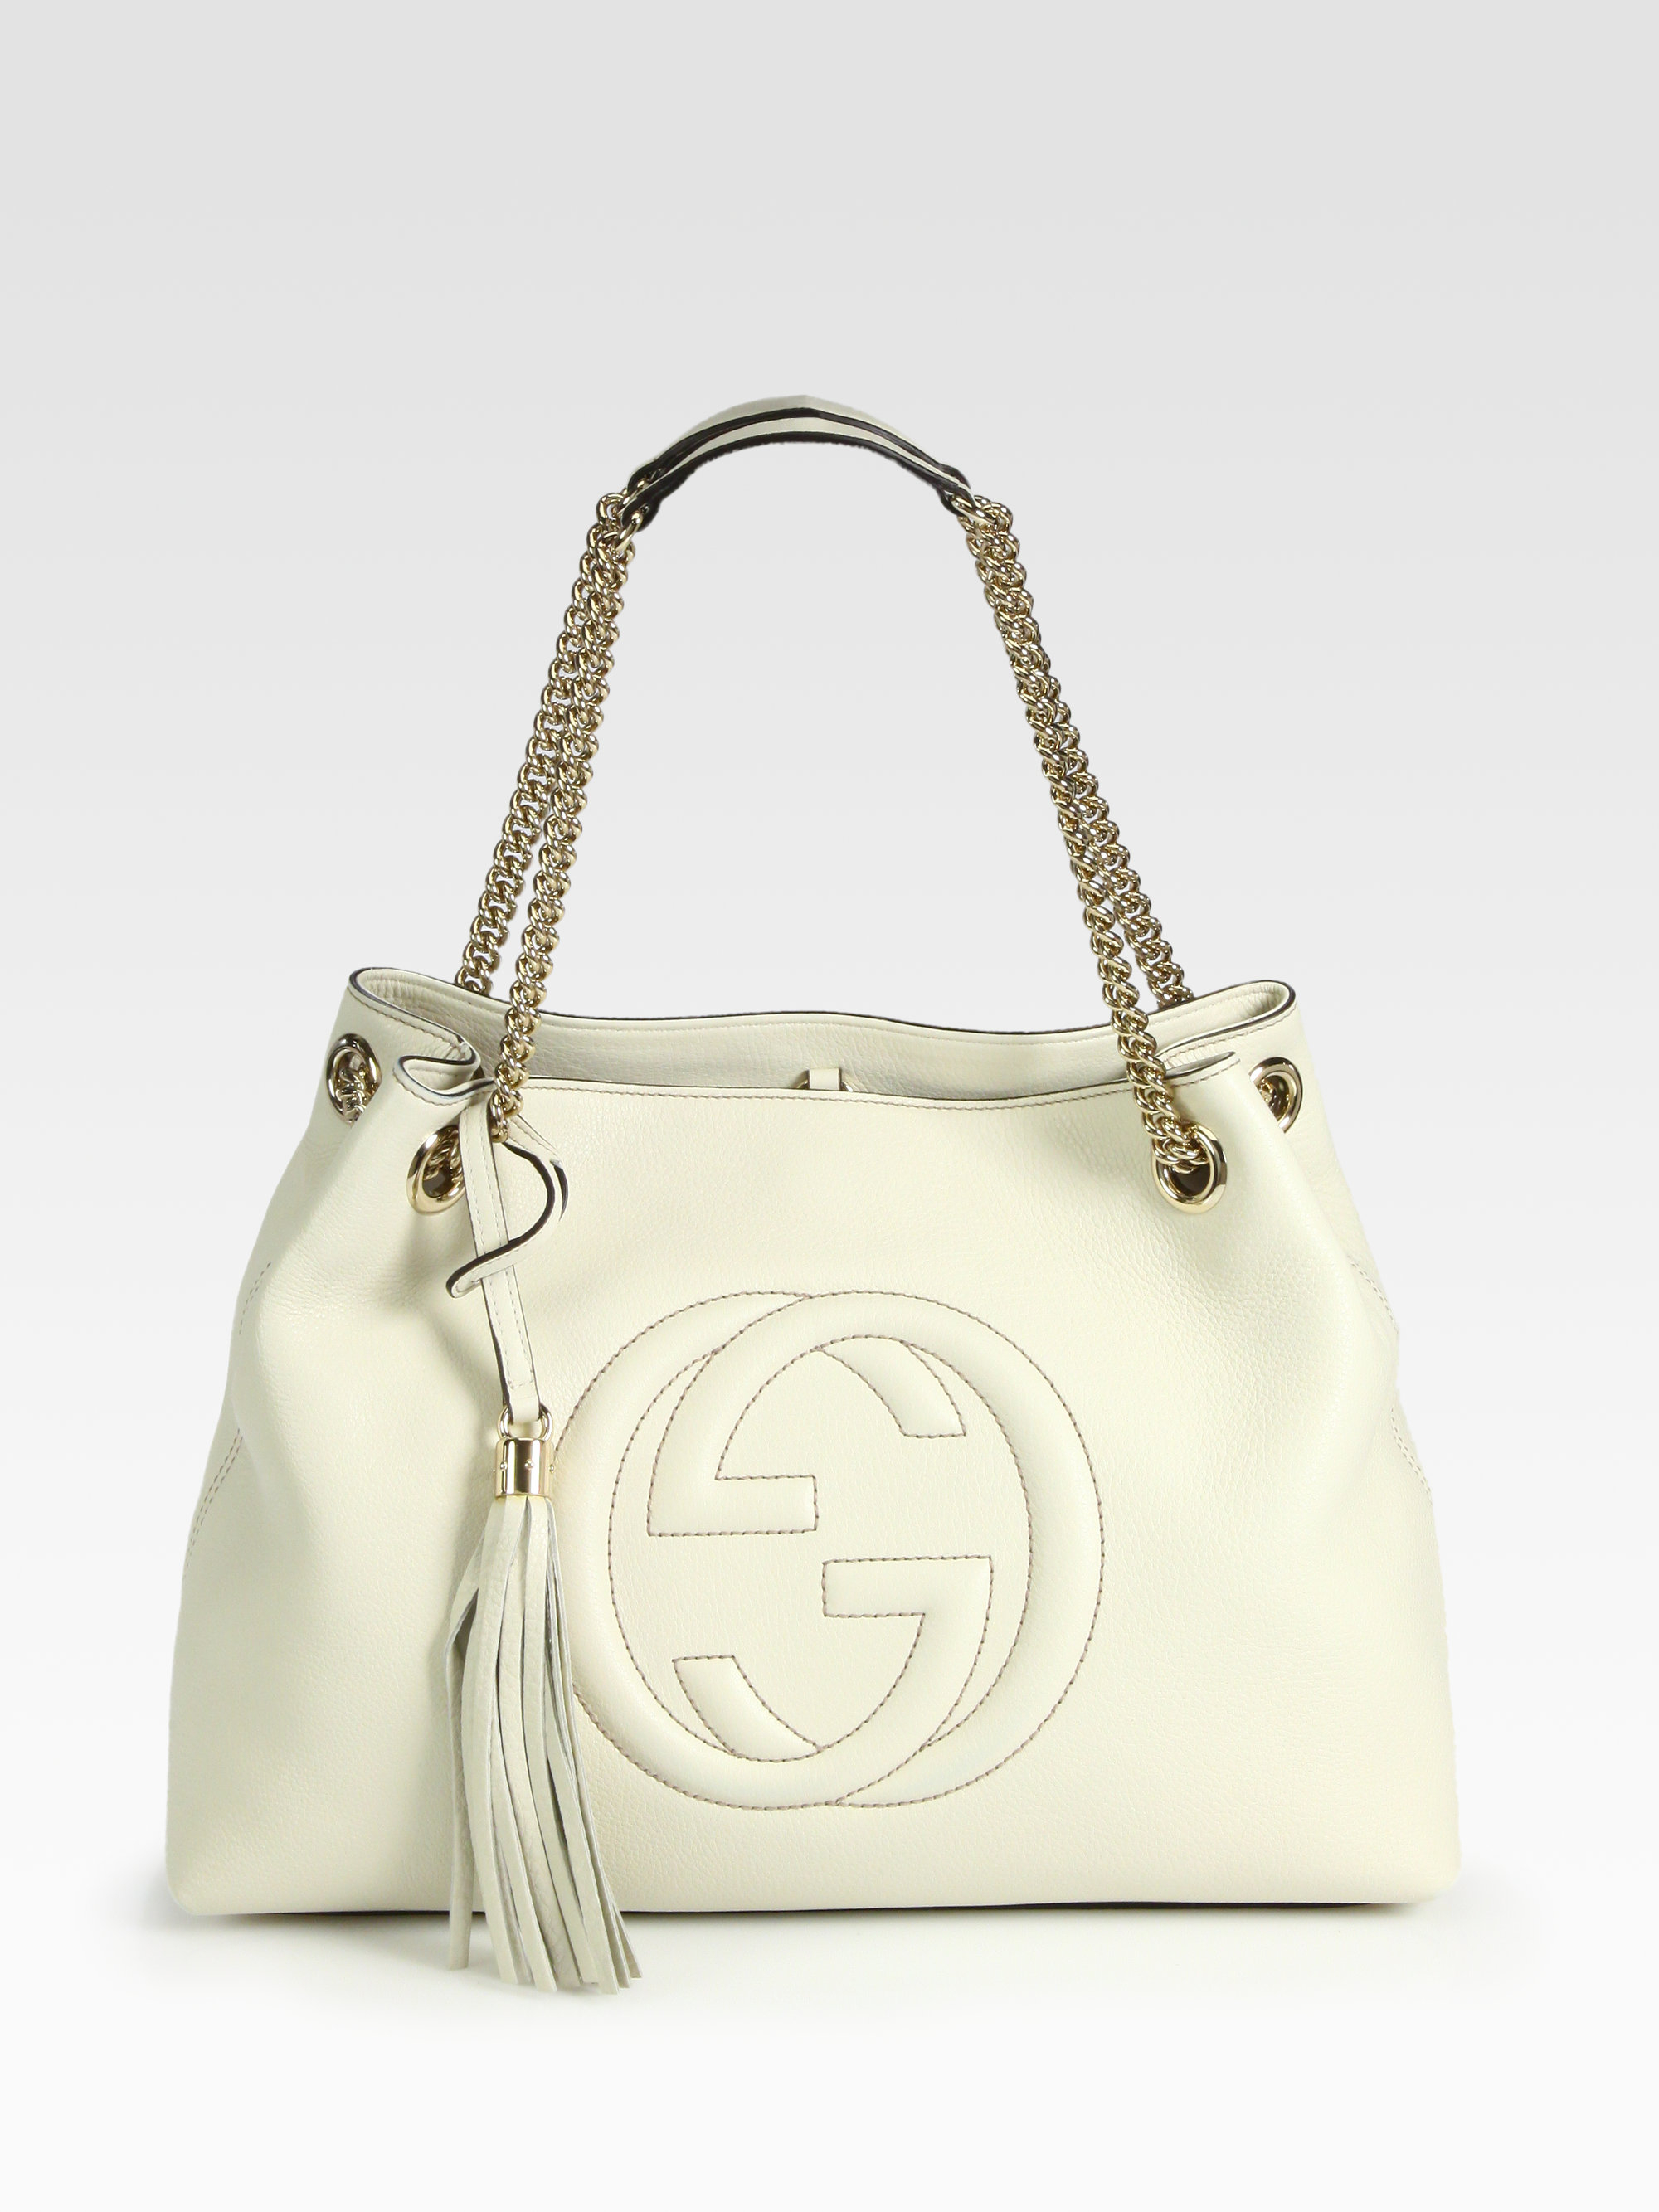 How To Clean A White Leather Gucci Purse | IQS Executive